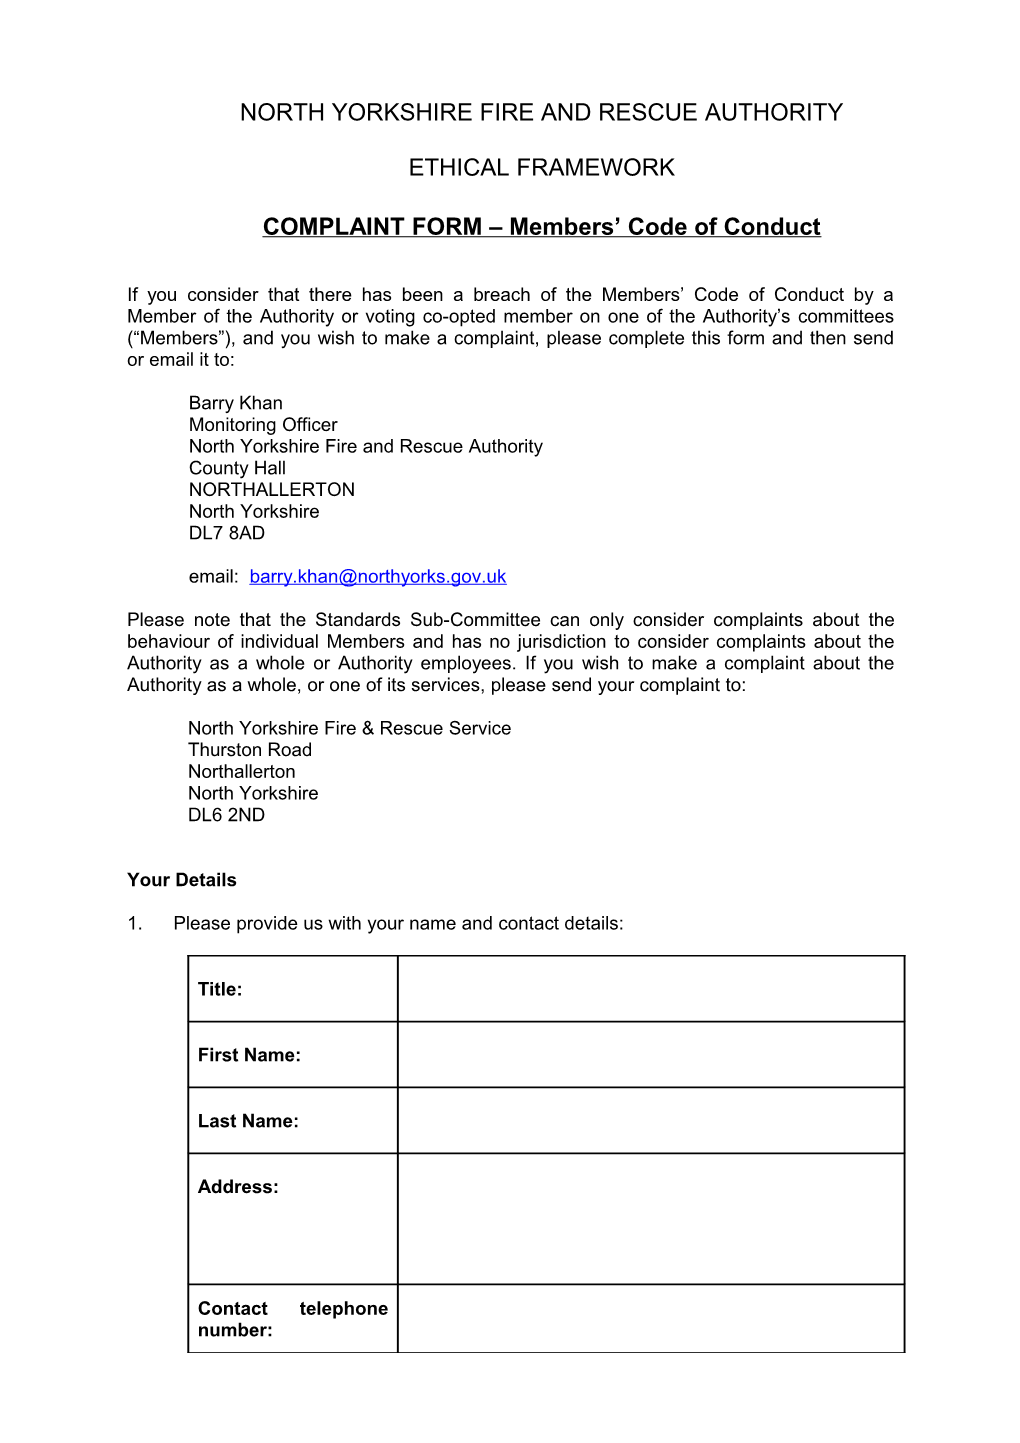 COMPLAINT FORM Members Code of Conduct